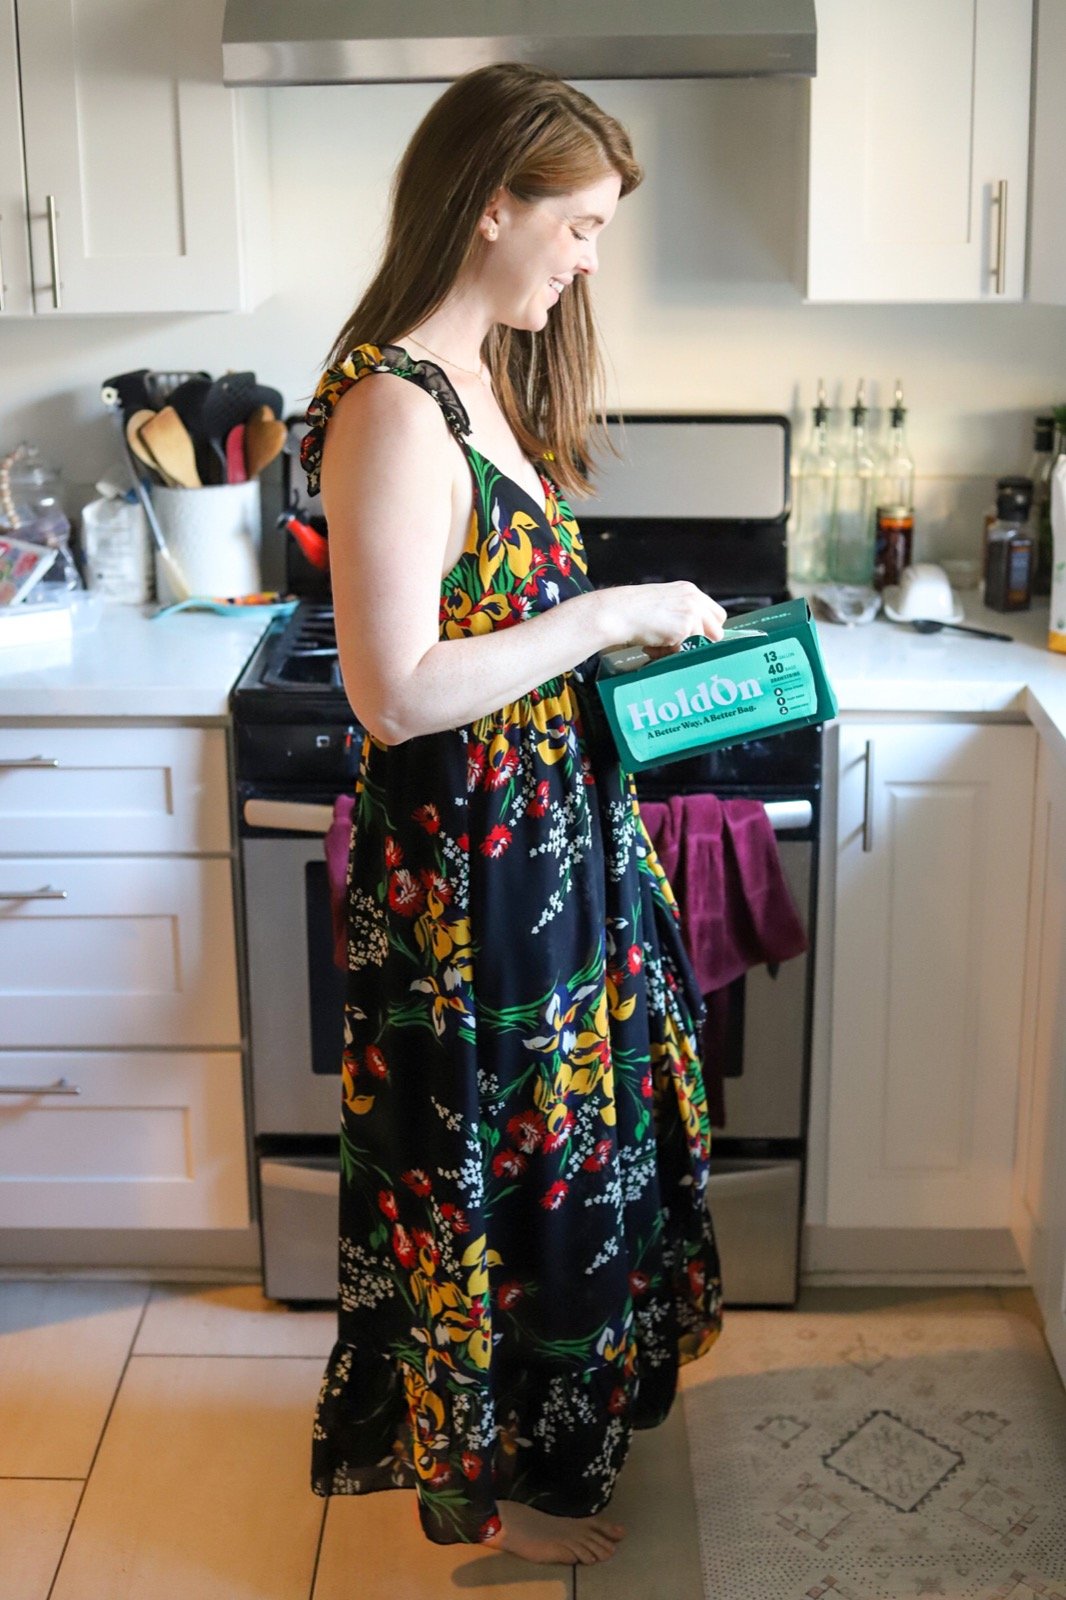 hold on trash and zip bags, heavy duty trash bags, easy home compostable bags that are better than plastic, discount code, compostable bags on the go for trips, snacks, and more, lments of style, la blogger, plant-based bags